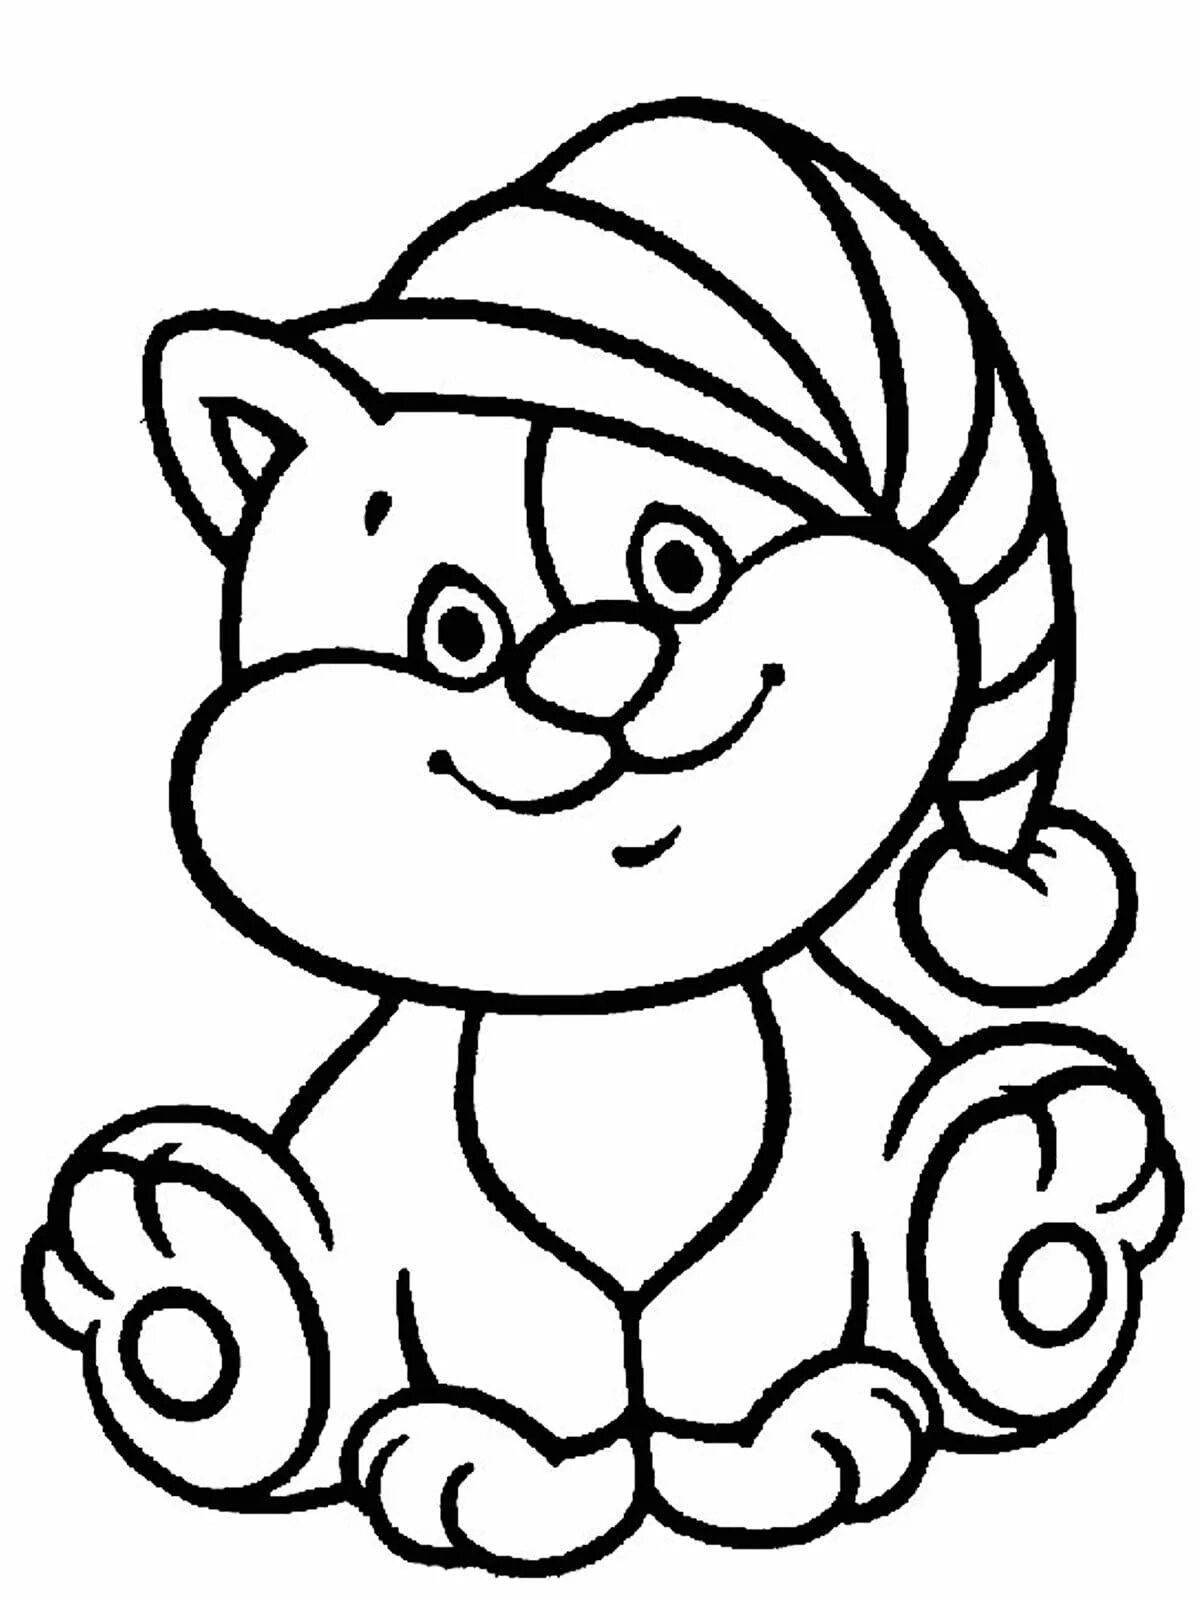 Fluffy cat coloring book for children 2-3 years old